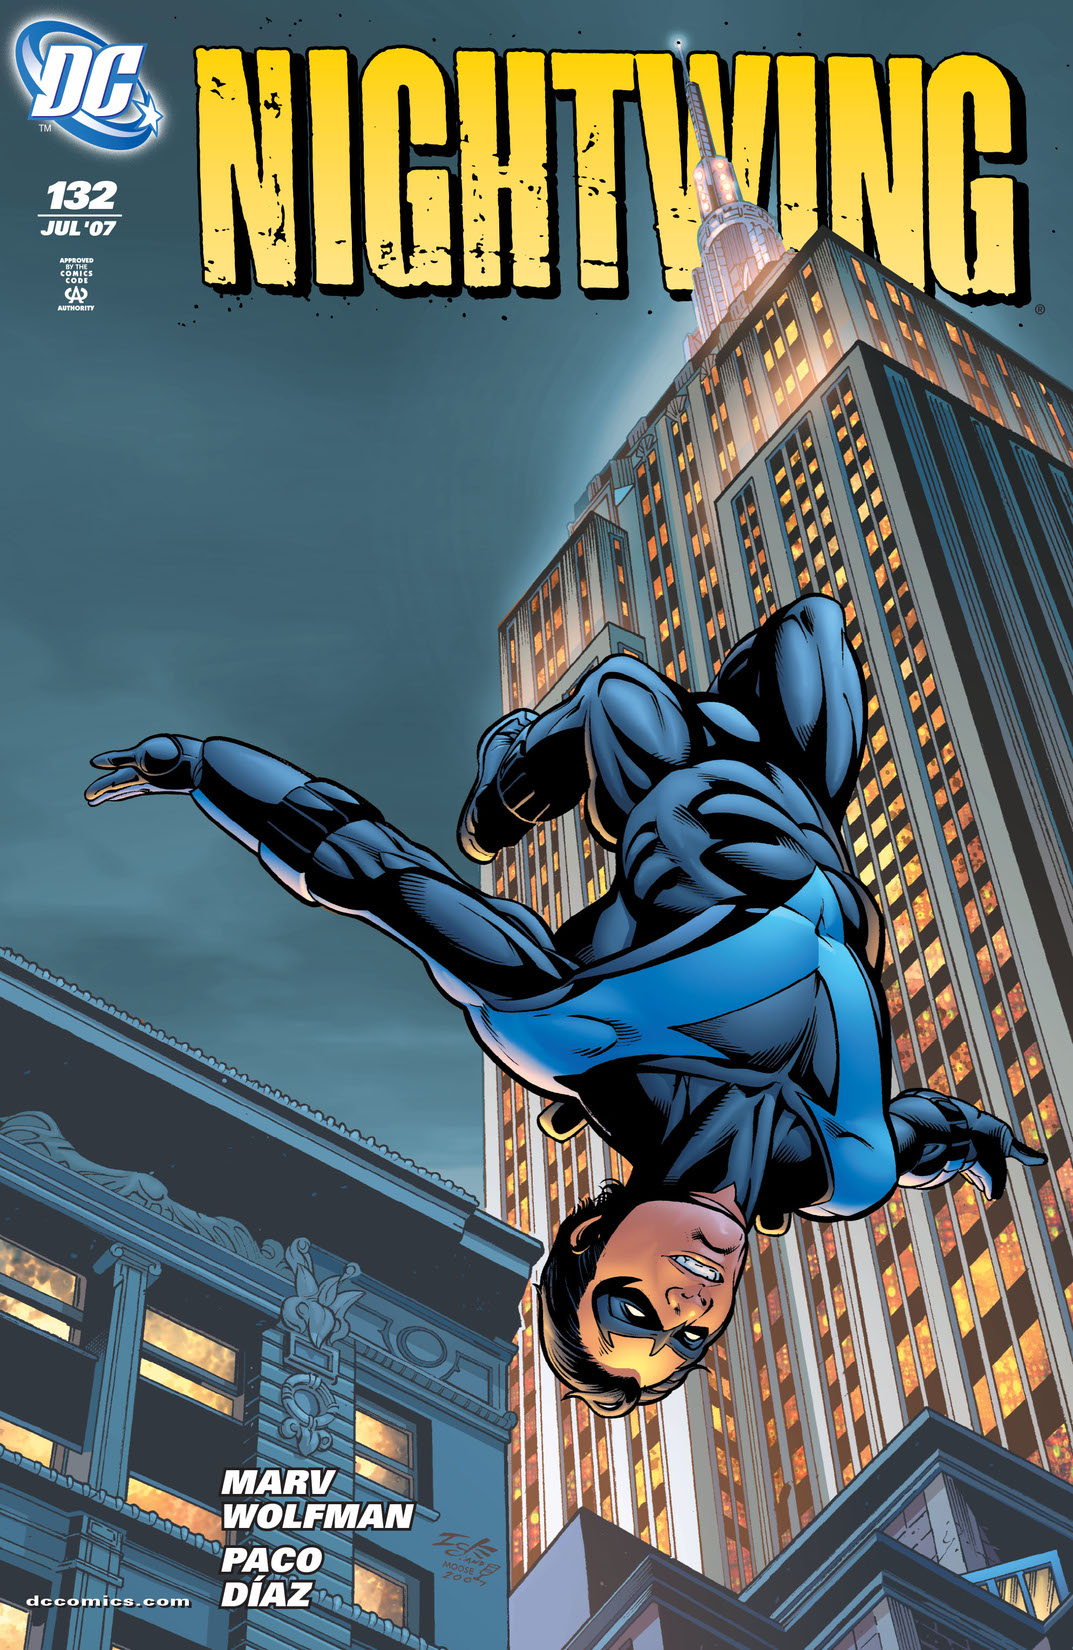 Nightwing (1996-) #132 preview images